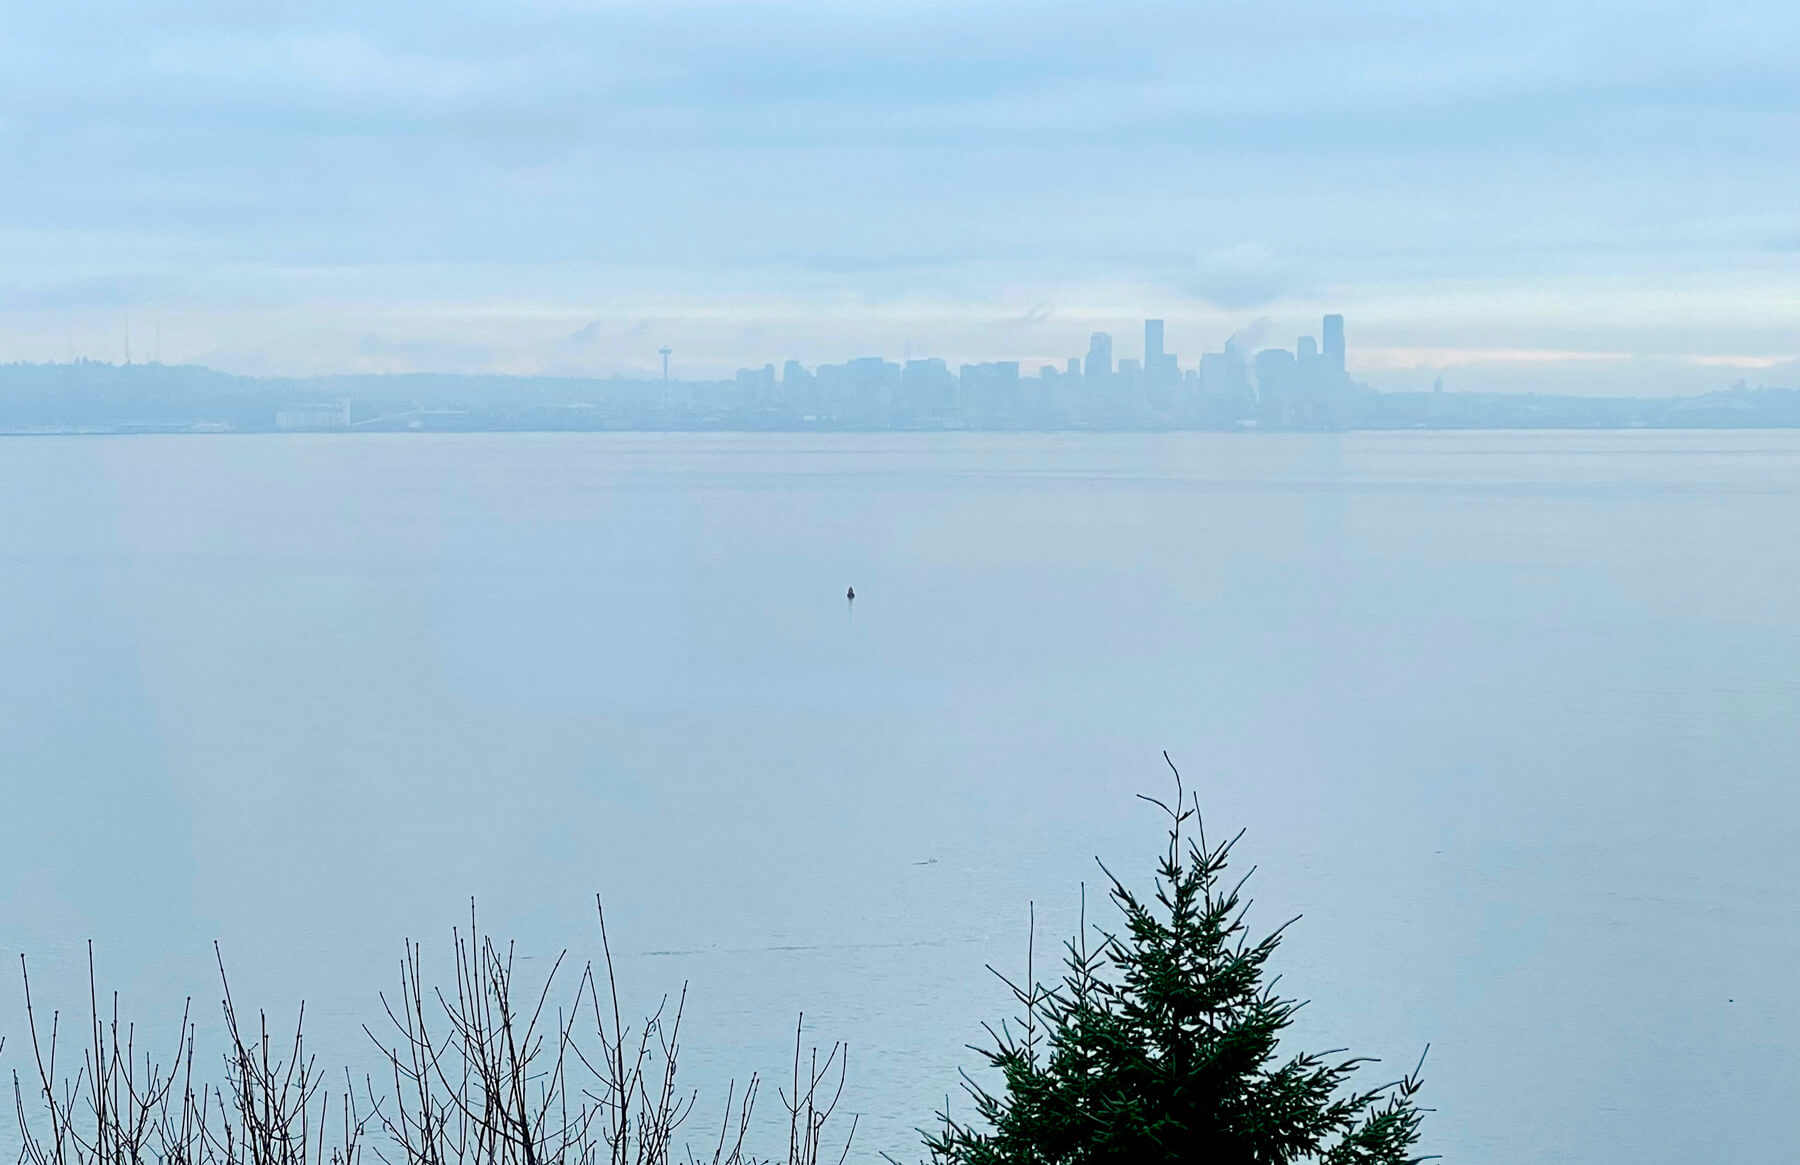 View of Seattle skyline & Puget sound from Bainbridge island on a foggy day